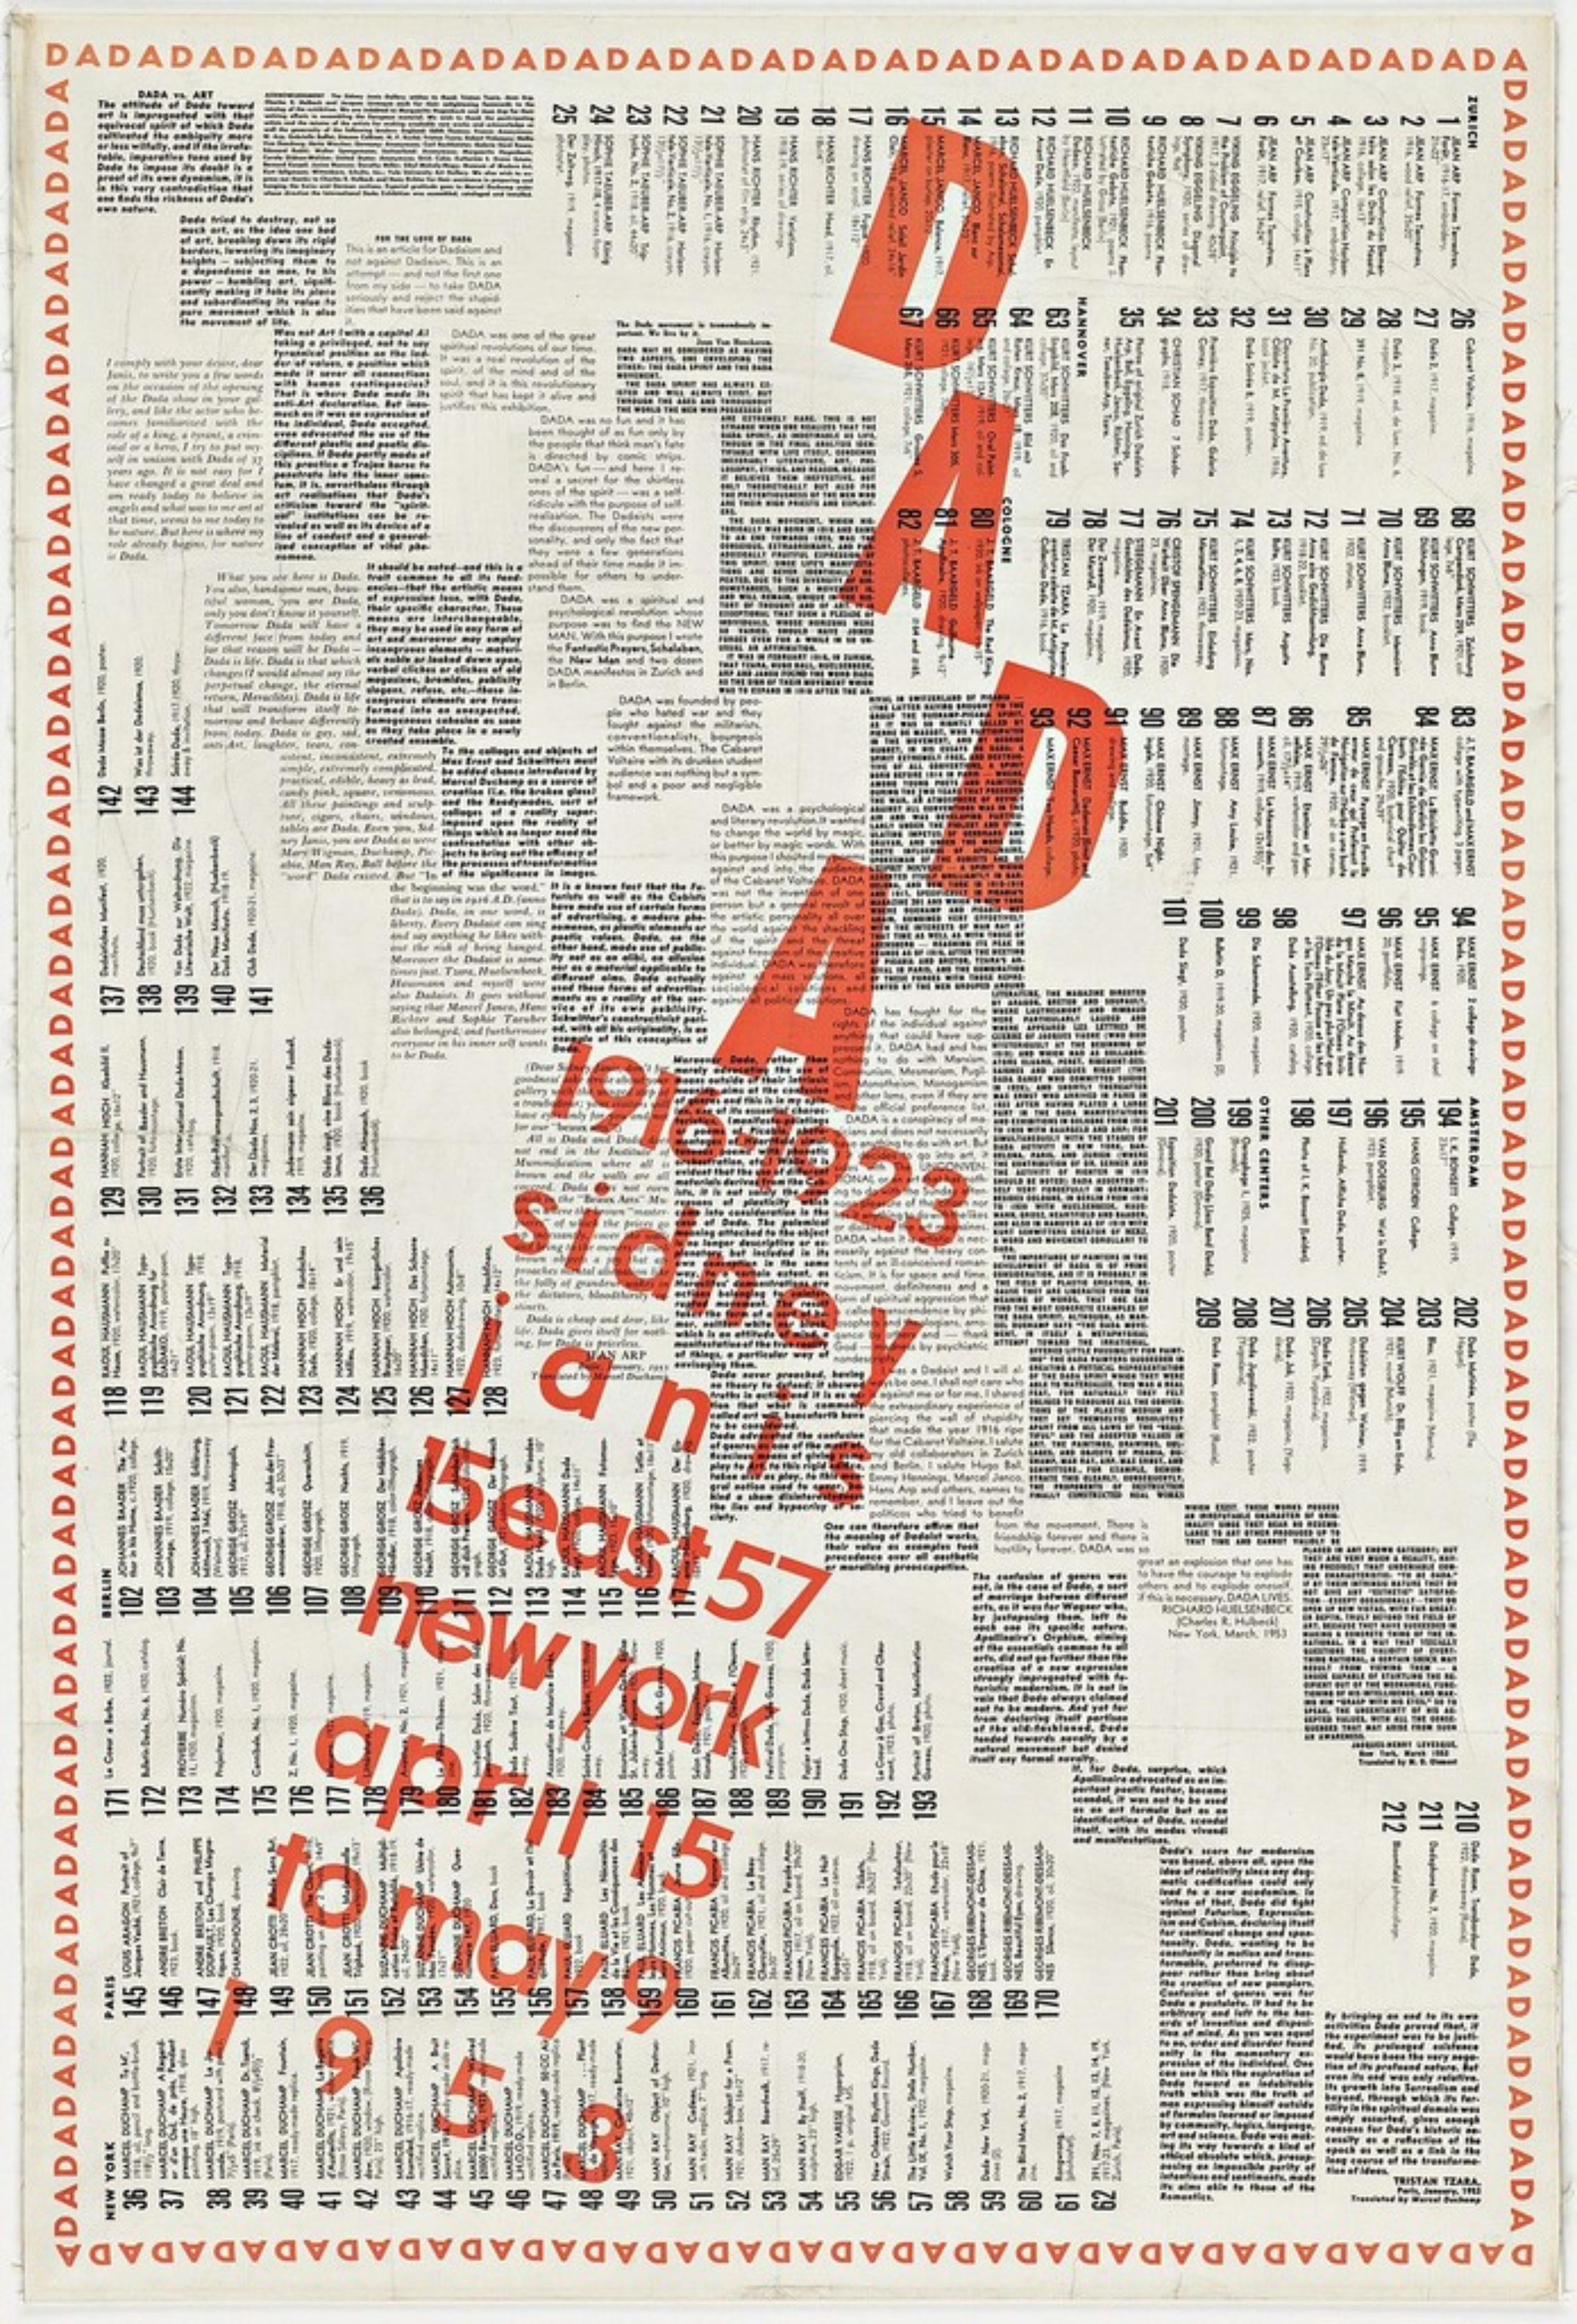 DADA historique Sidney Janis gallery mixed media, mid century designed by Duchamp